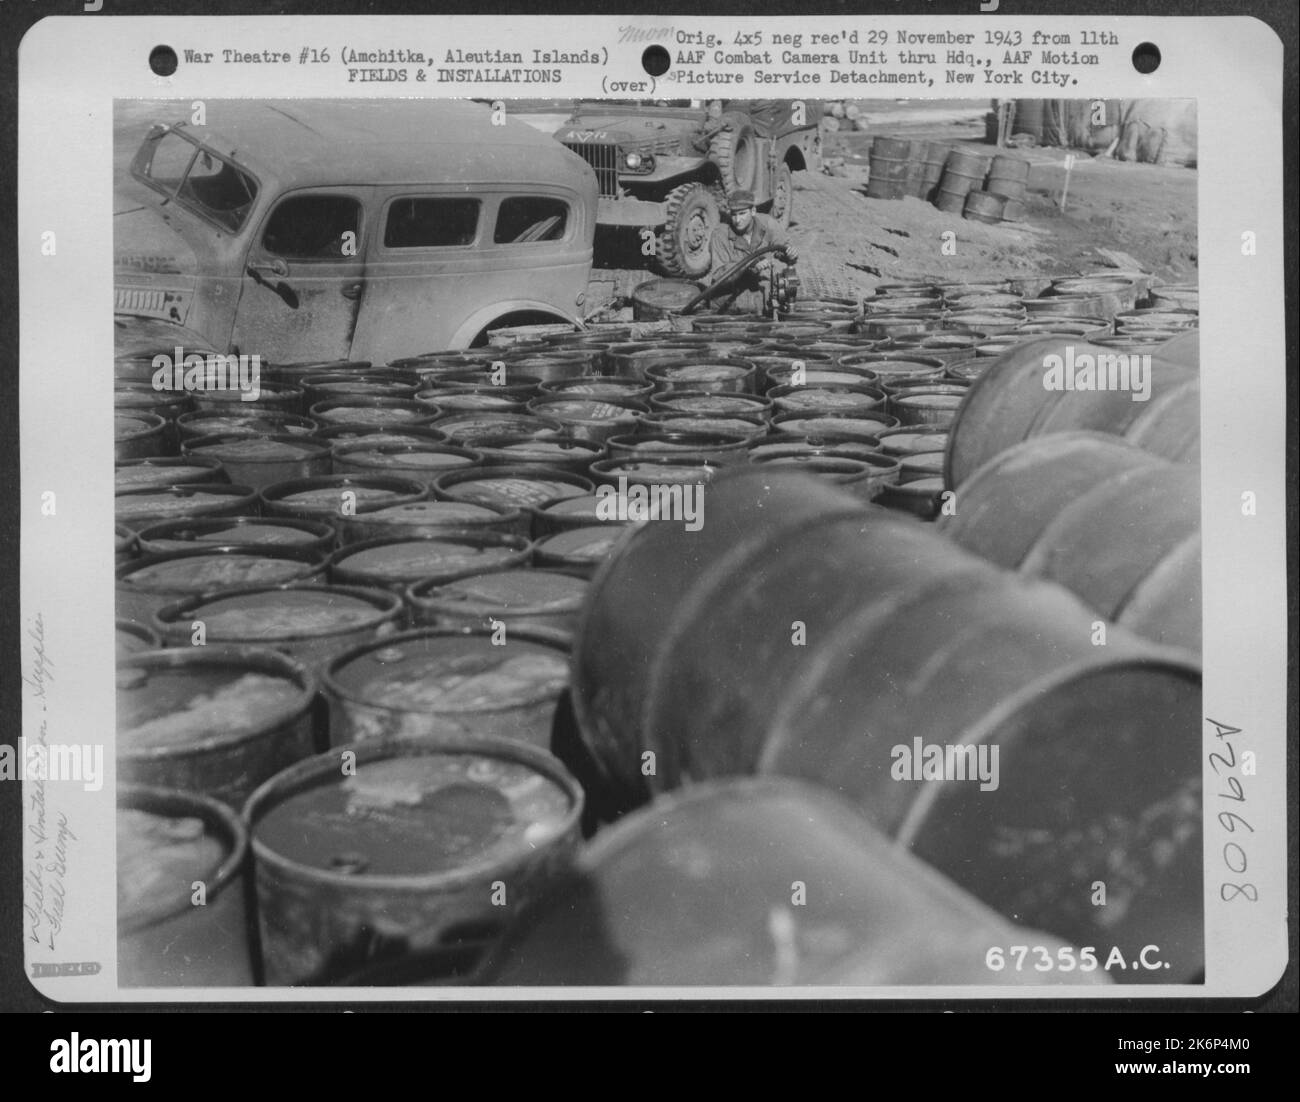 Drums of gasoline are stacked side by side at a fuel dump on Amchitka, Aleutian Islands. Note the truck being refueled. 10 October 1943. Stock Photo